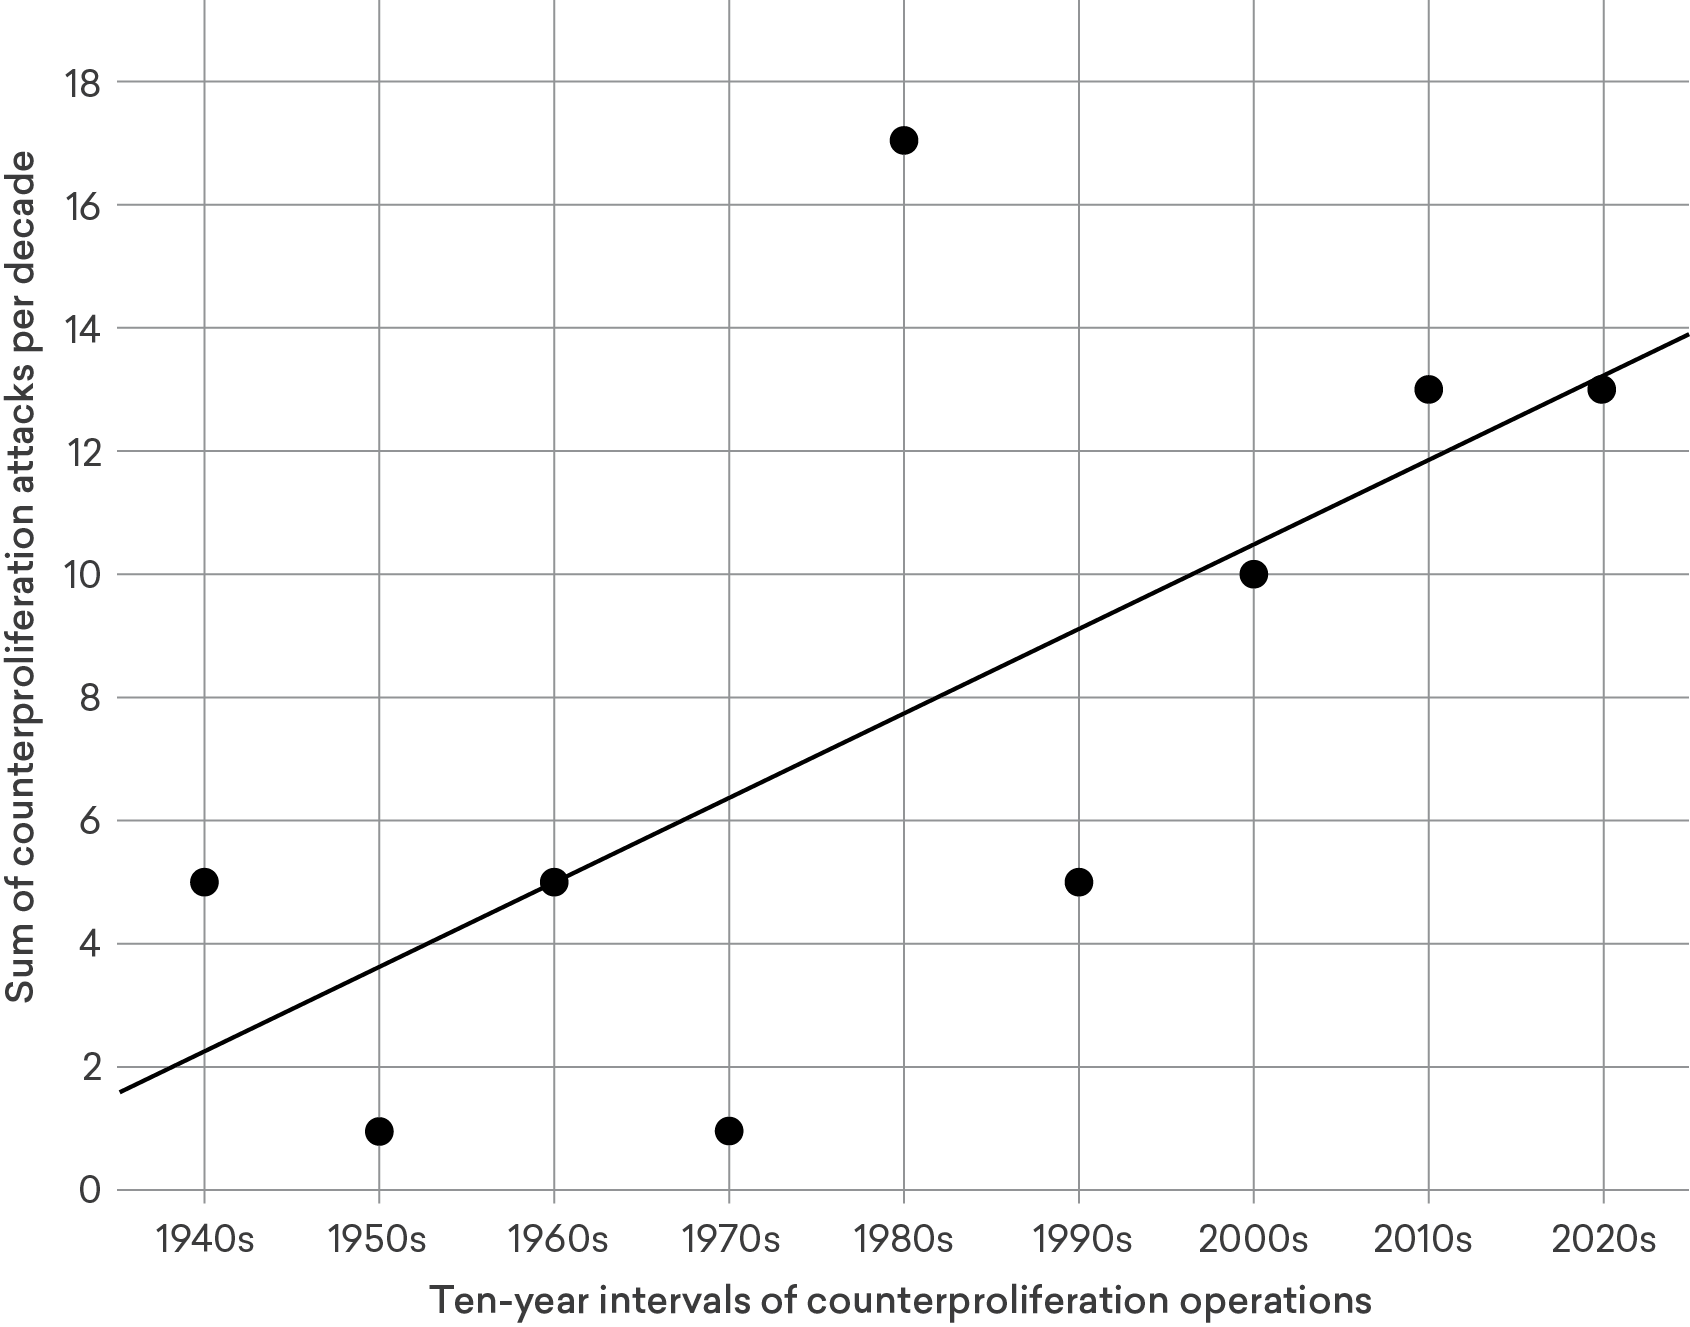 A scatterpoint graph depicts counterproliferation operations, which peaked in the 1980s, and were lowest in the 1950s and 1970s.